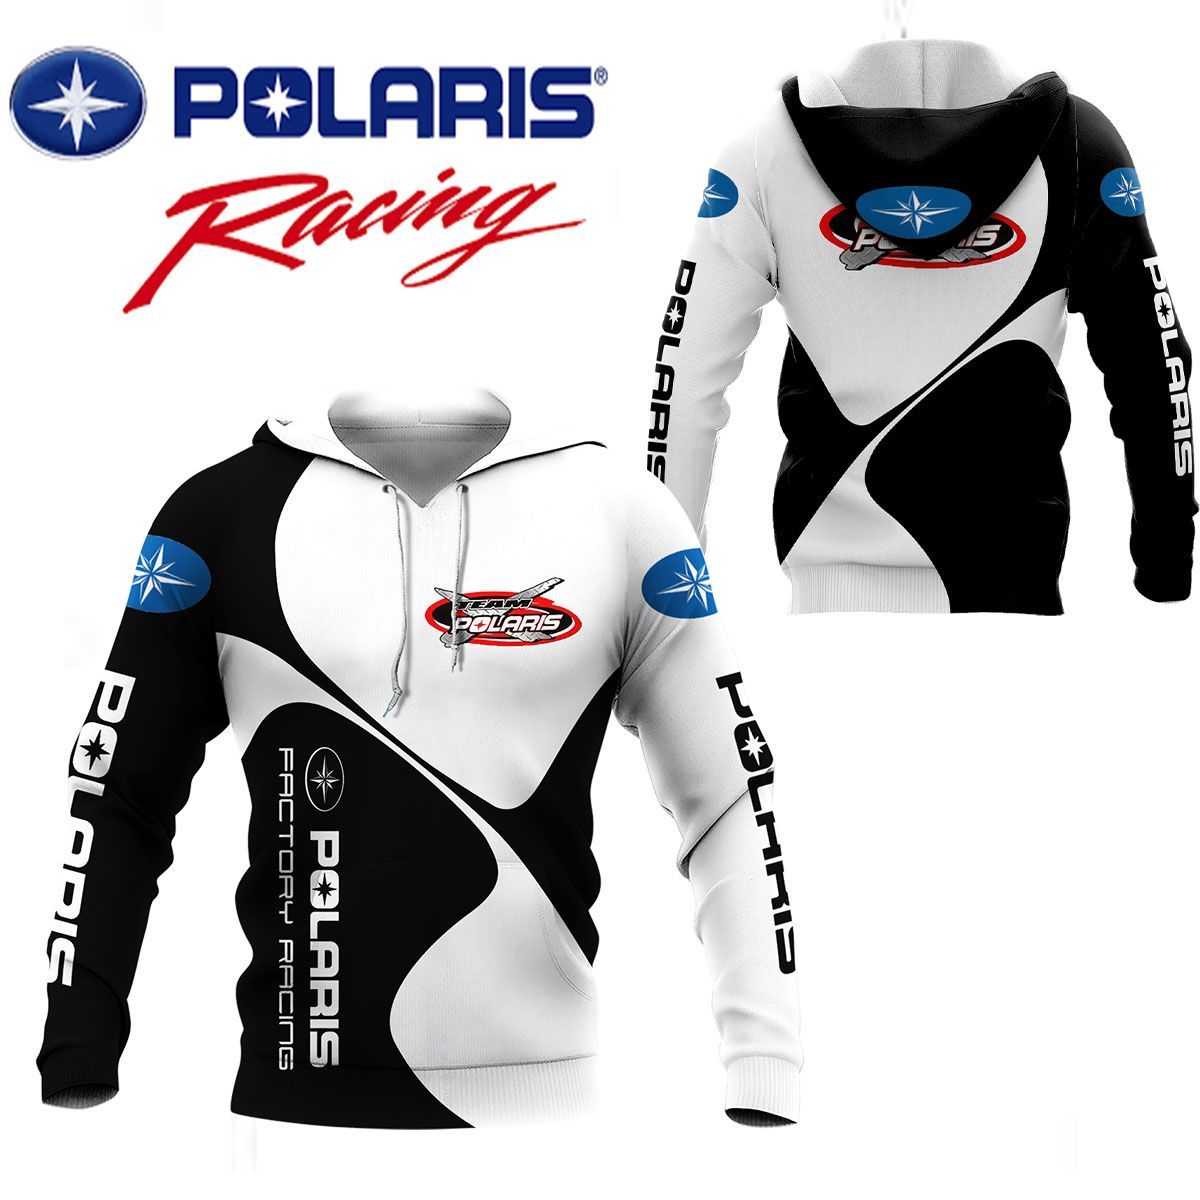 3D All Over Printed Polaris Racing Team Lph-Ht Shirts Ver 2 (White)